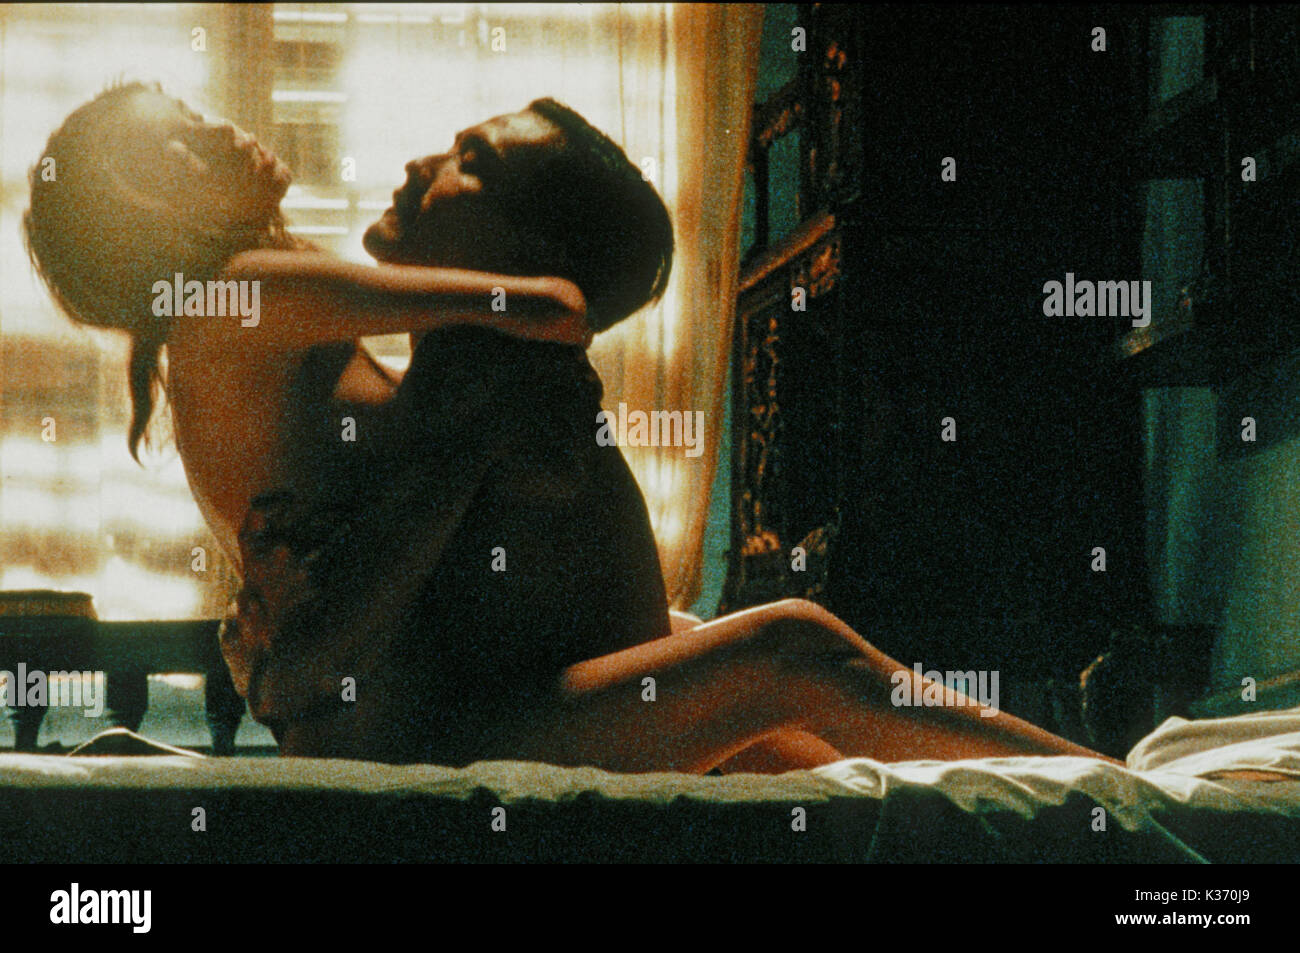 THE LOVER [FR/BR/VIETNAM 1992] aka L'AMANT JANE MARCH AND TONY LEUNG   THE LOVER     Date: 1992 Stock Photo